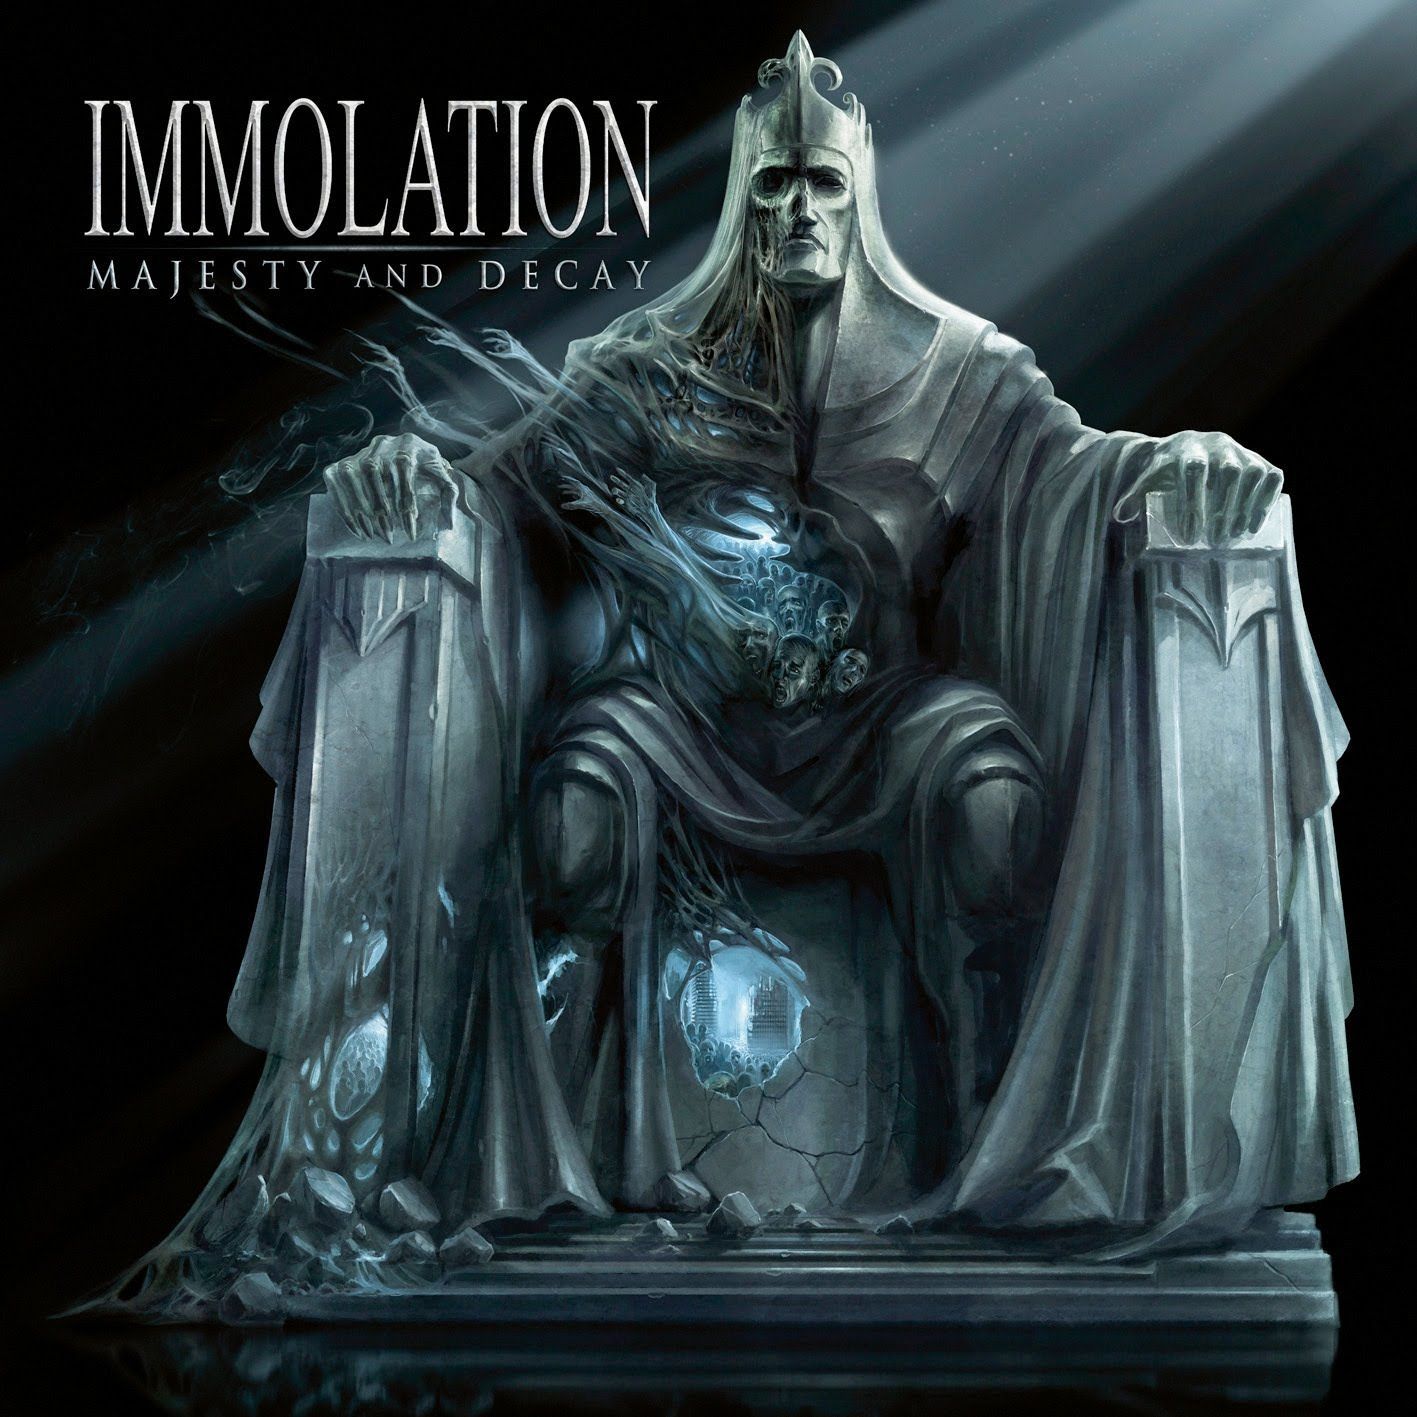 Immolation and Decay. Death metal, Album art, Extreme metal